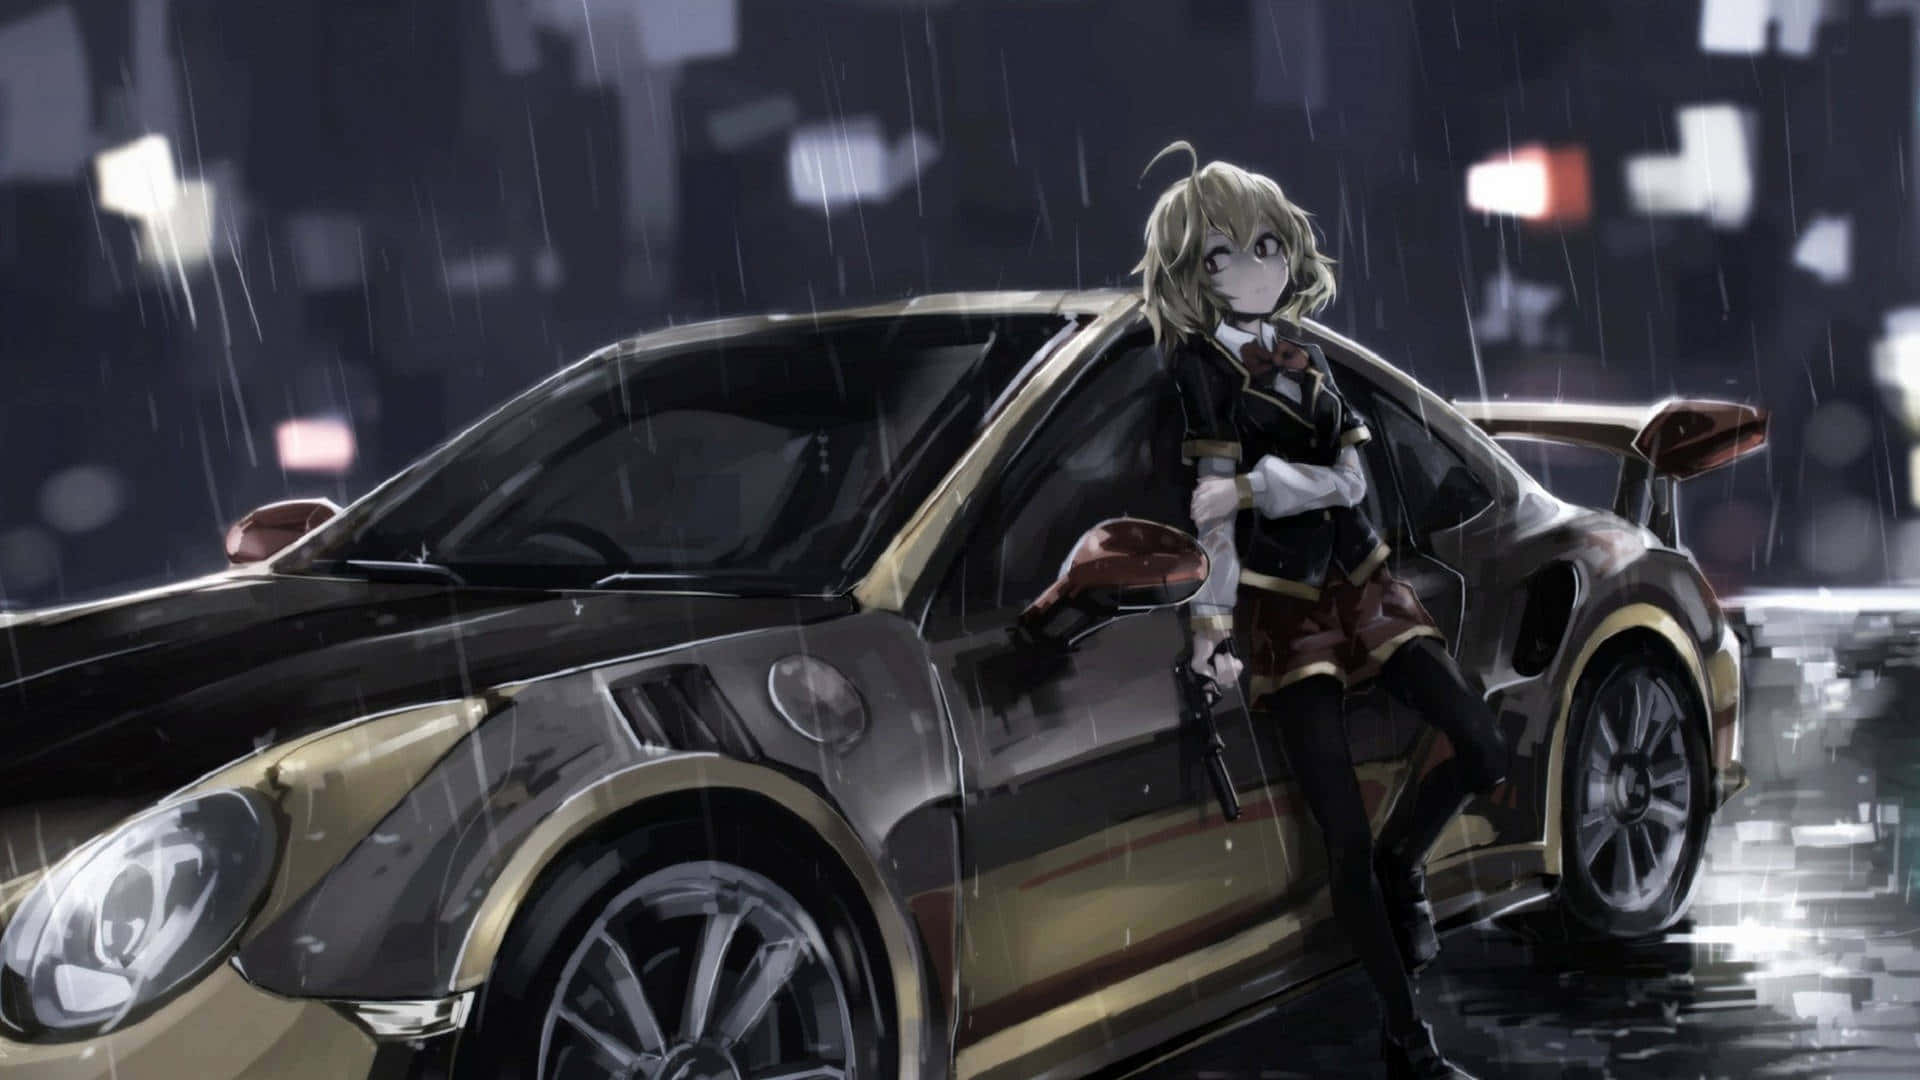 "Ride with Style: Show Off Your Anime Car"